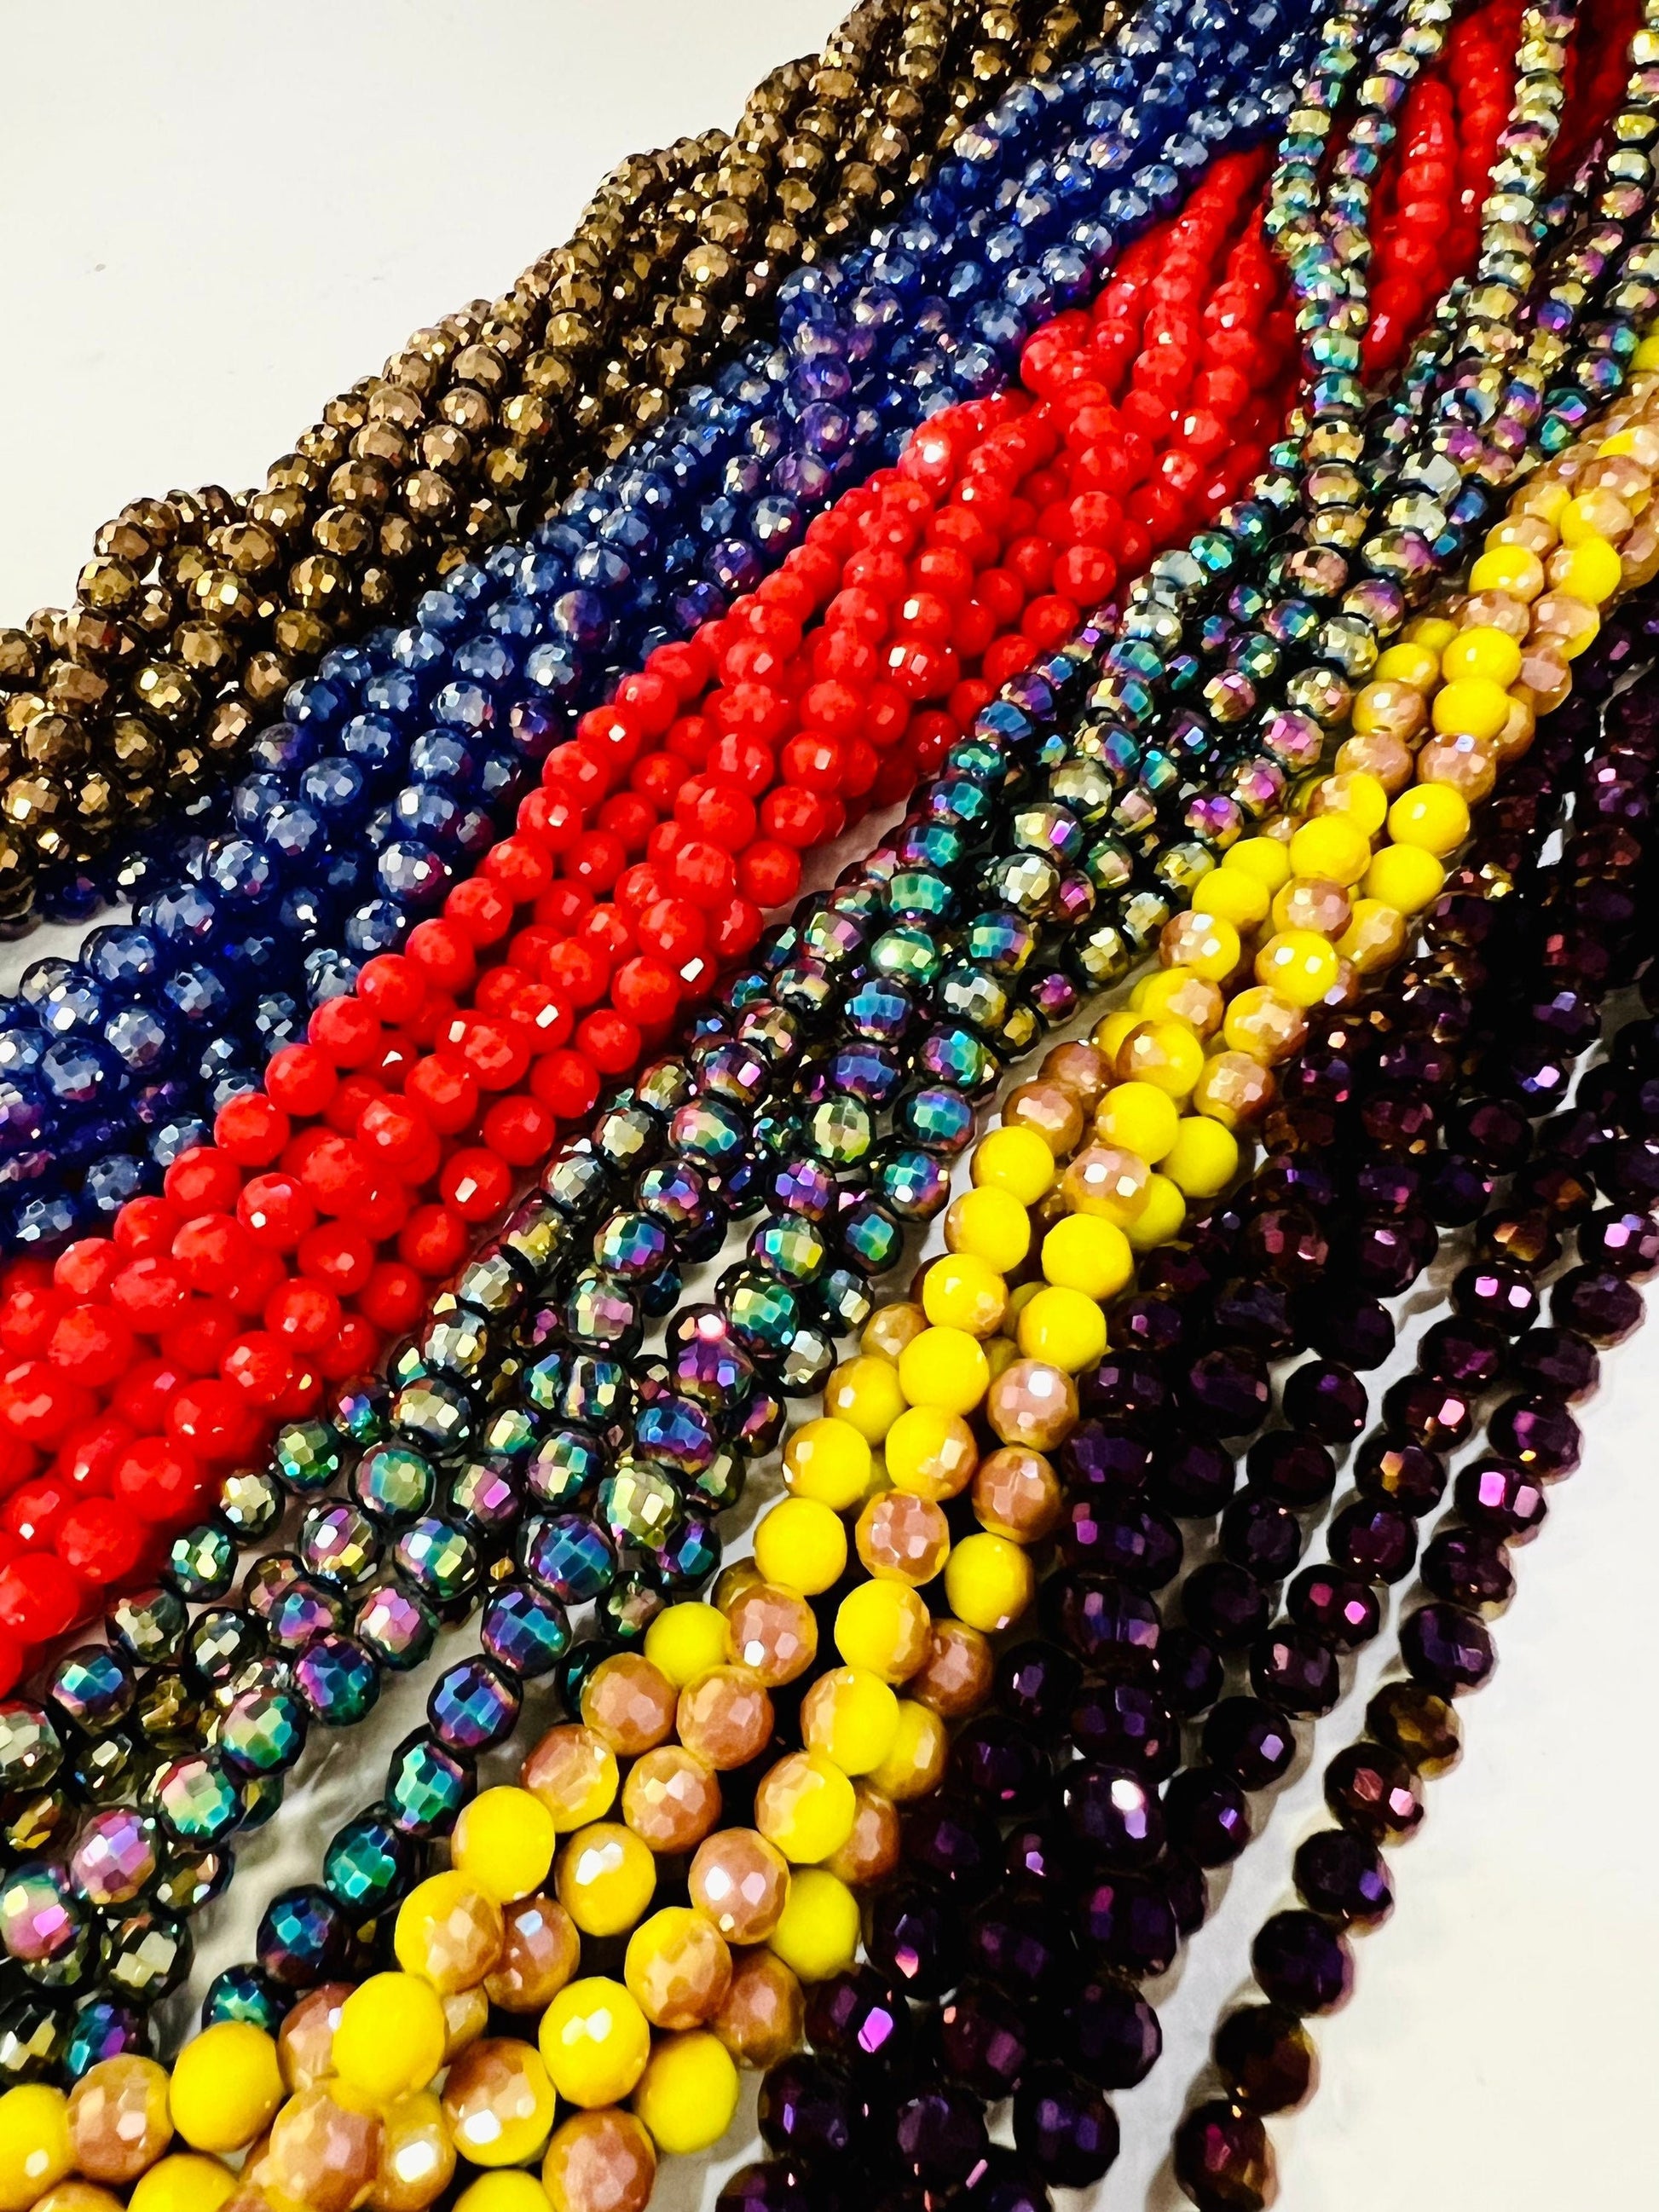 Crystal 6mm Round Bead , 14”strand (68-70 pcs) Very Sparkly Shiny Crystal Bead for Spacer,Art Deco, Jewelry Making Beads, Gold Purple Yellow